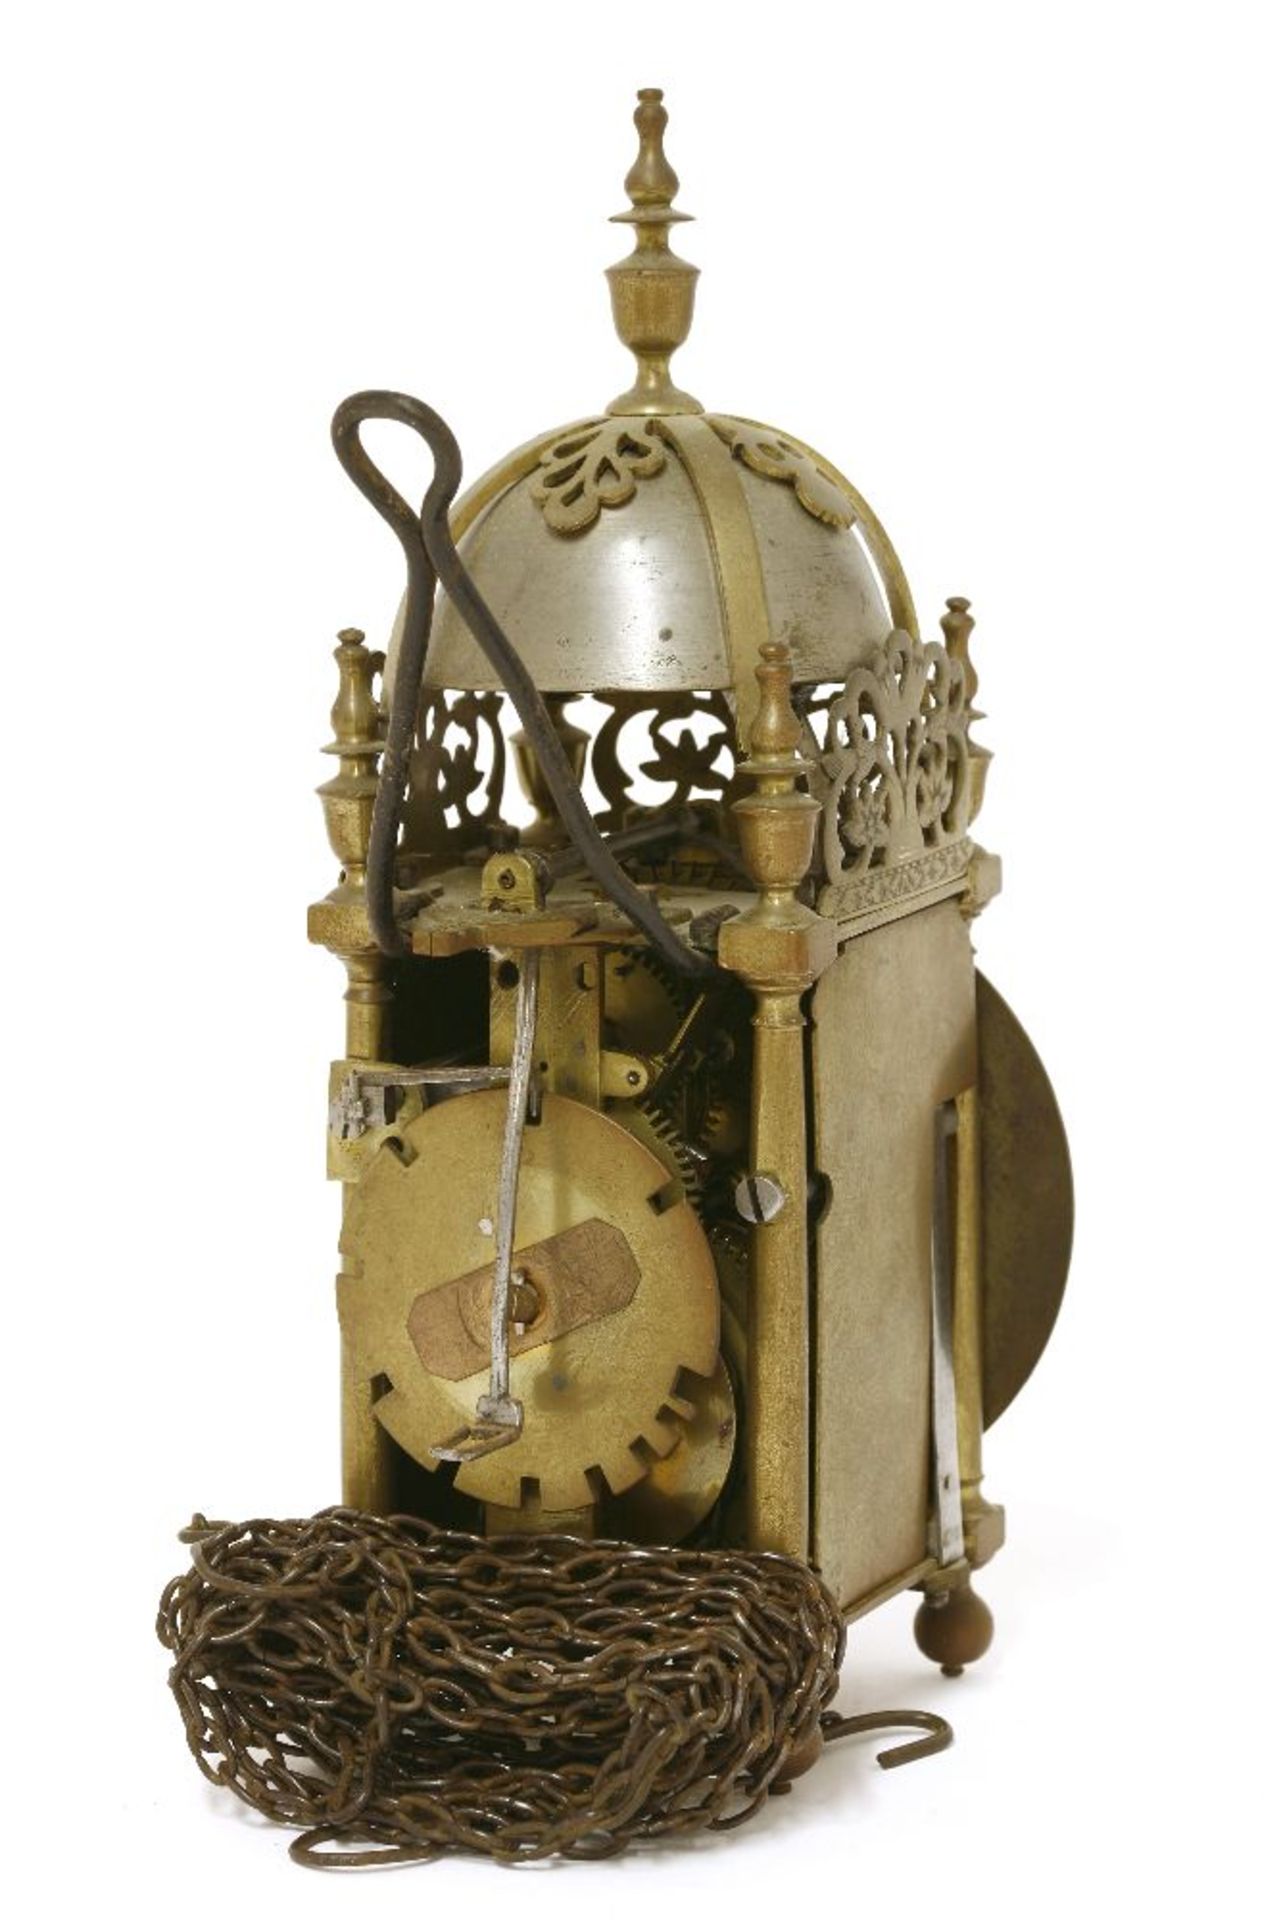 A small brass lantern clock,17th century, by William Parslow, Stonehouse, with an outside count - Image 2 of 3